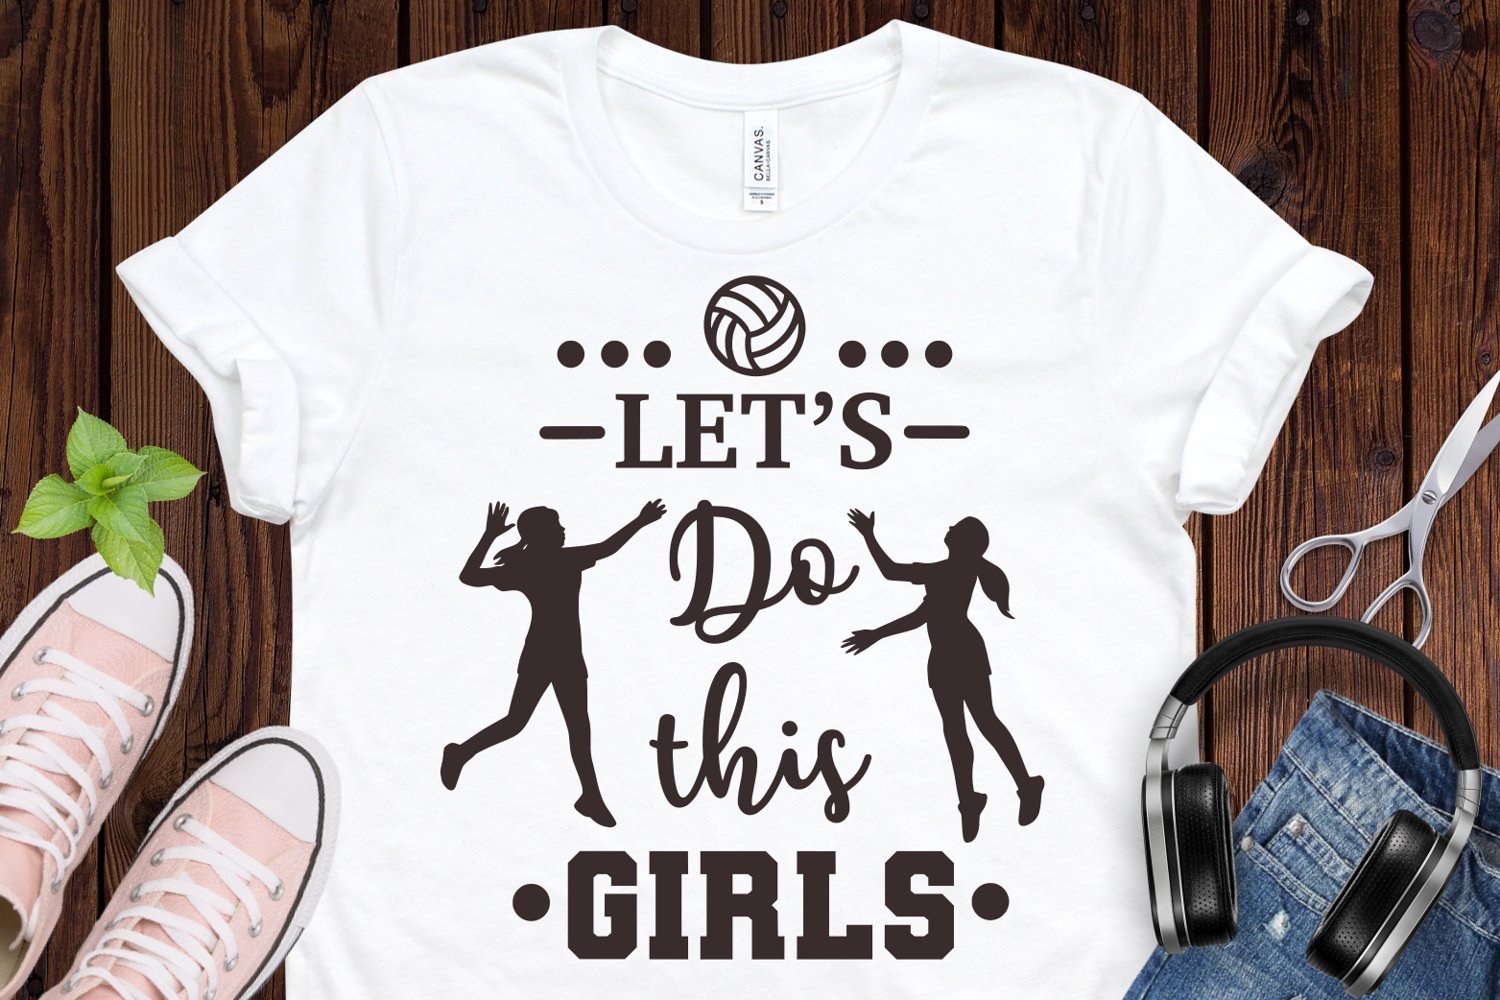 Lets do this girls - t-shirt design.